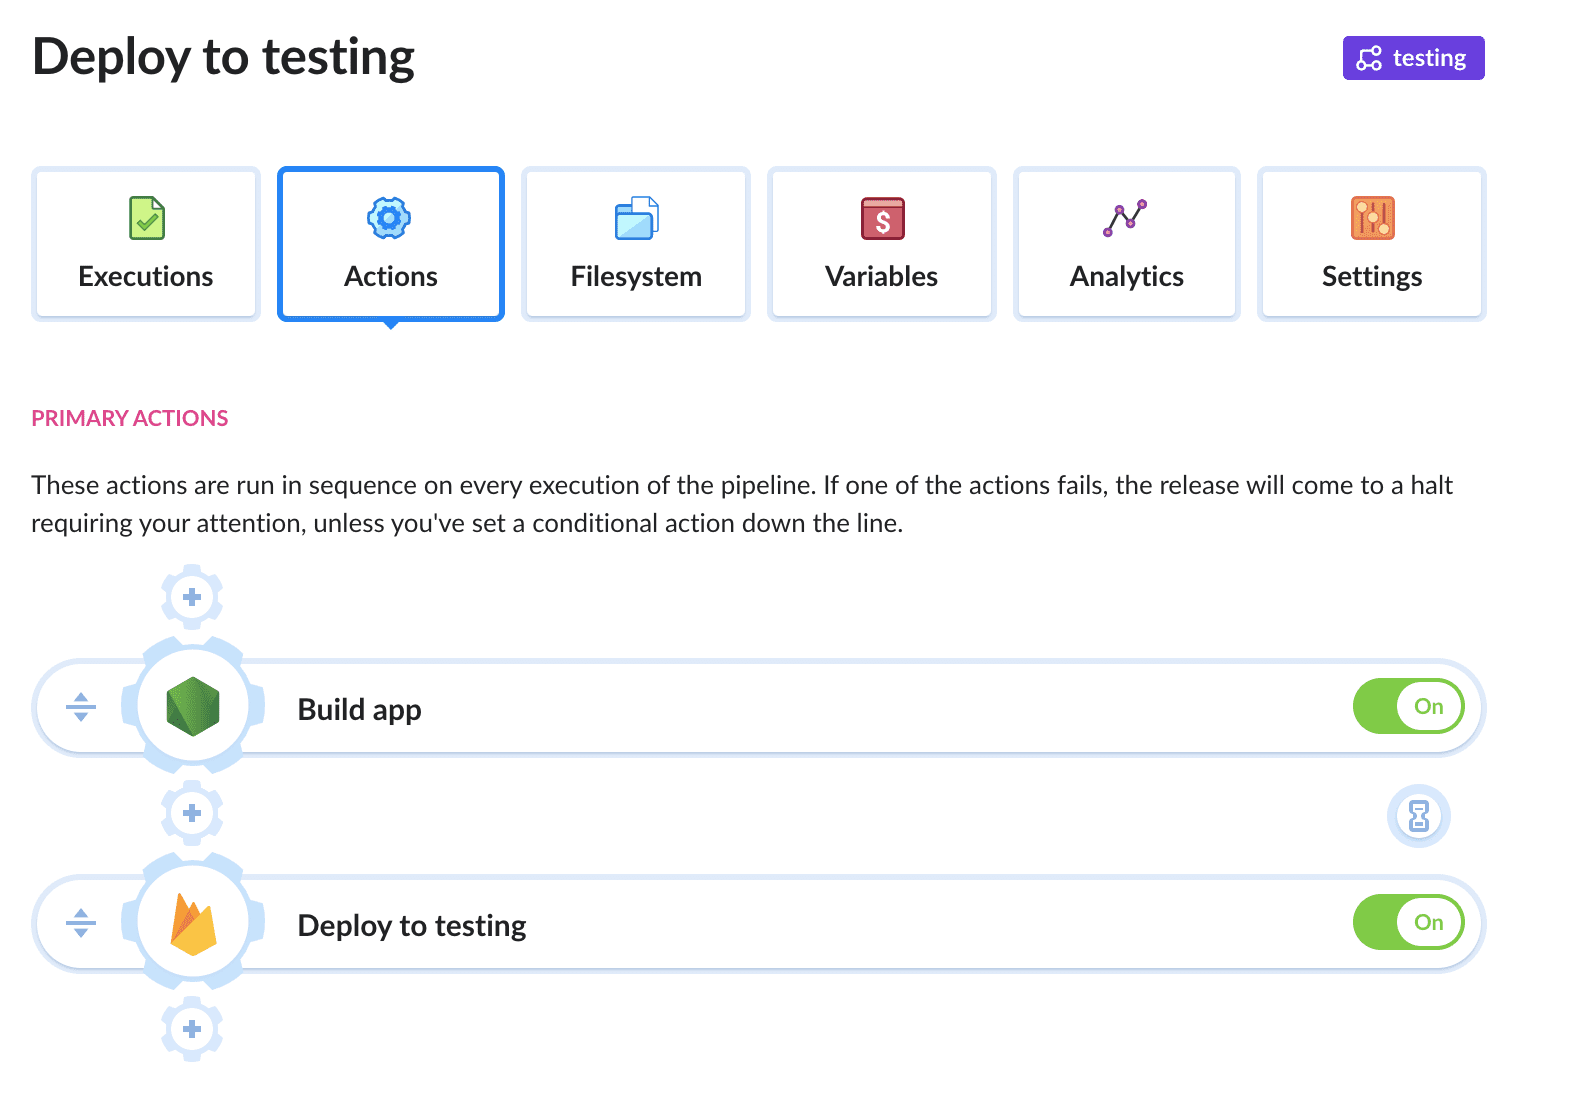 Testing pipeline overview